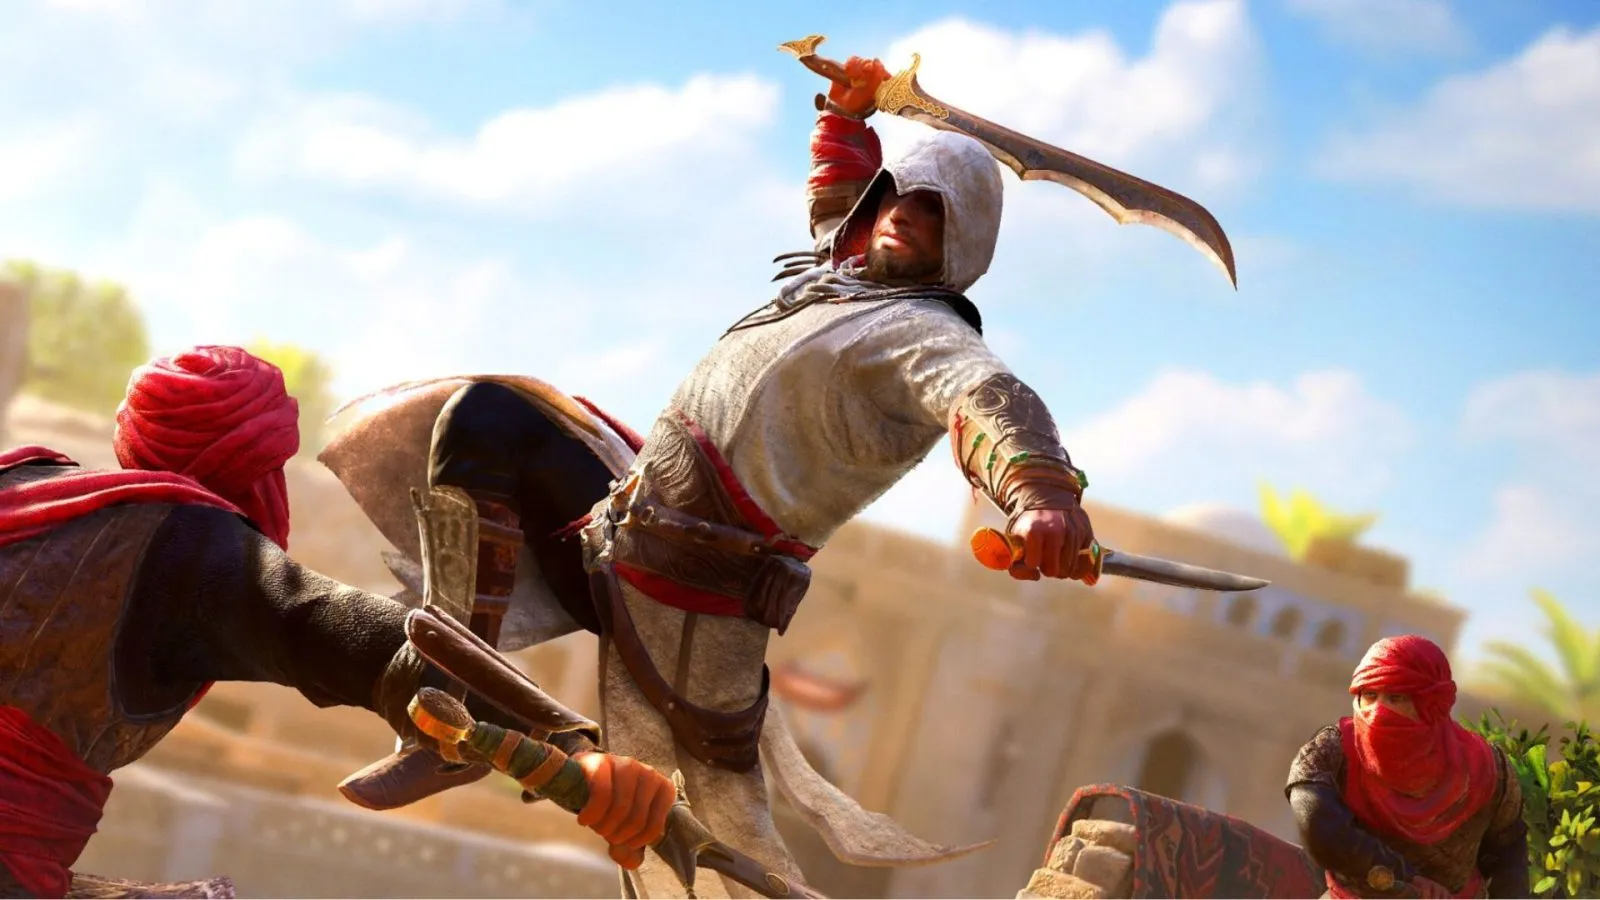 Assassin's Creed Valhalla deserves to end with a New Game Plus update